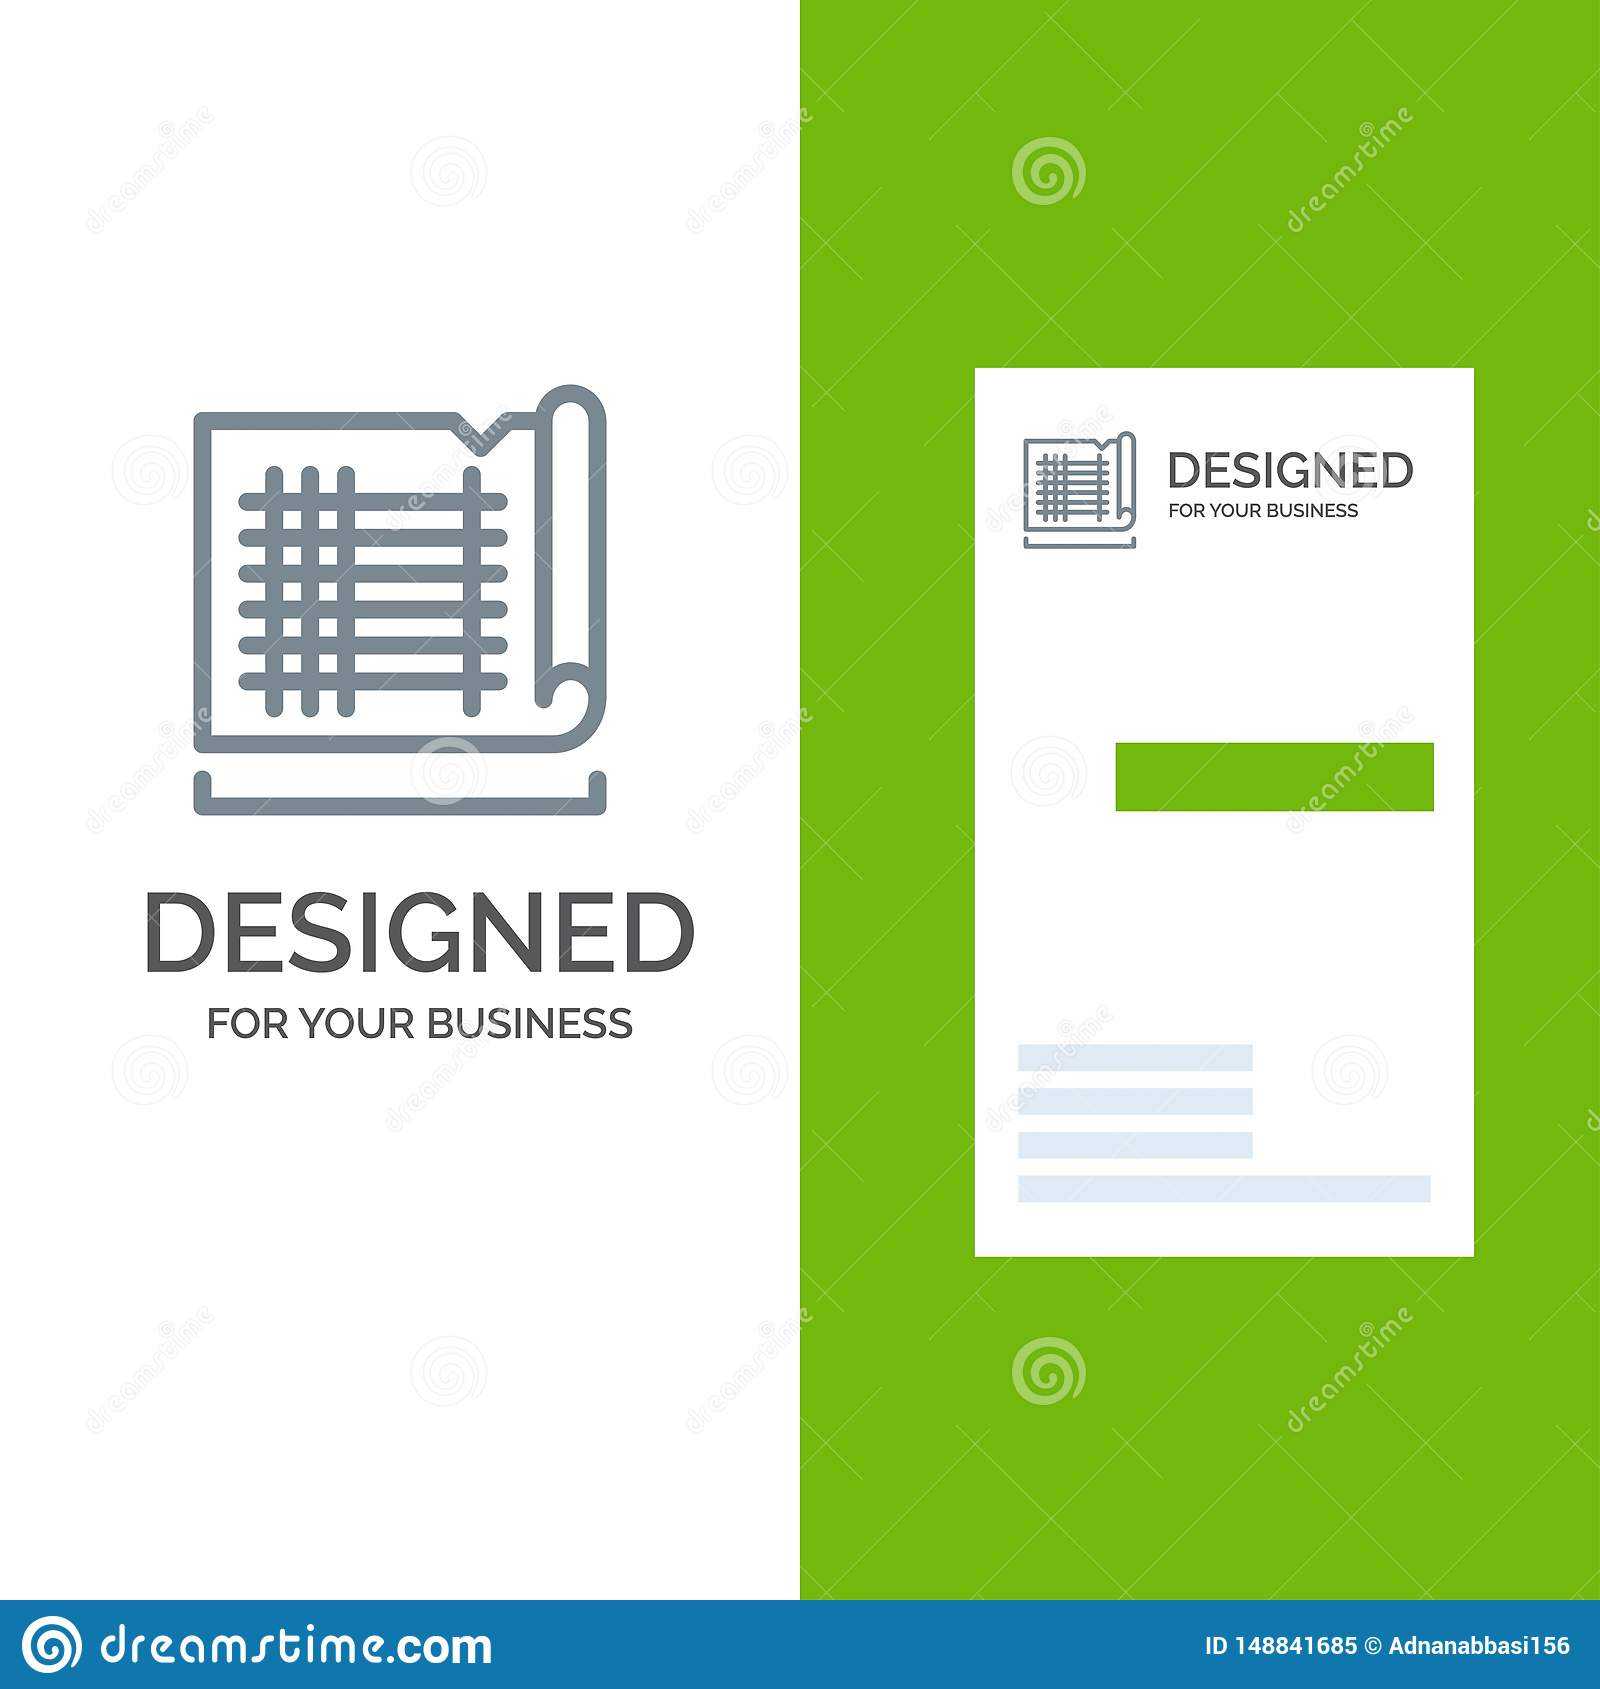 Construction, Drafting, House, Map Grey Logo Design And Regarding Construction Business Card Templates Download Free